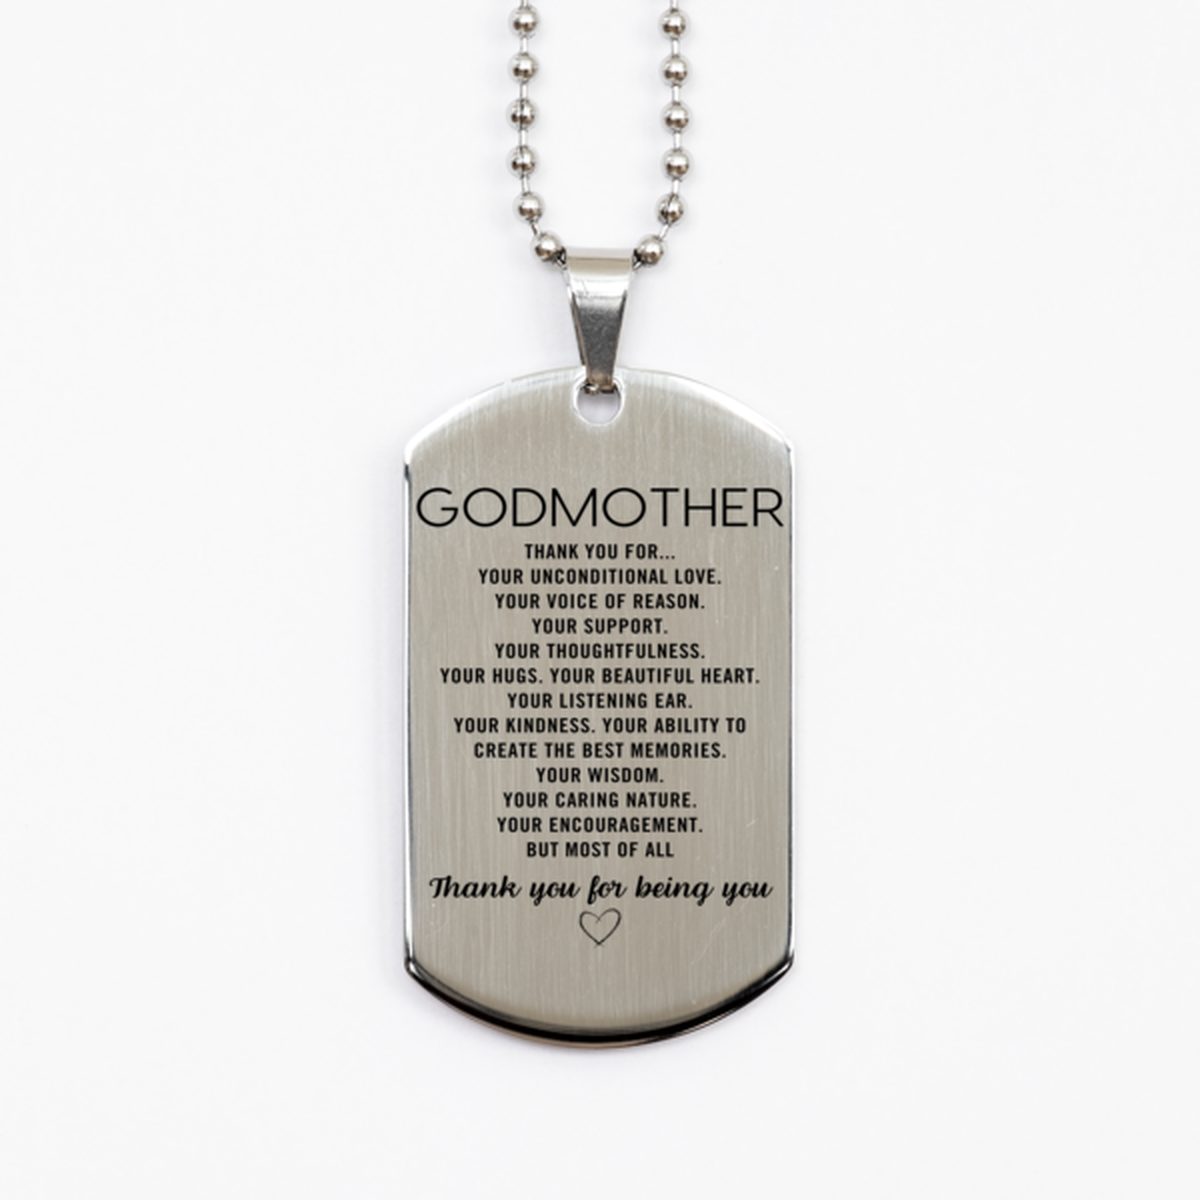 Godmother Silver Dog Tag Custom, Engraved Gifts For Godmother Christmas Graduation Birthday Gifts for Men Women Godmother Thank you for Your unconditional love